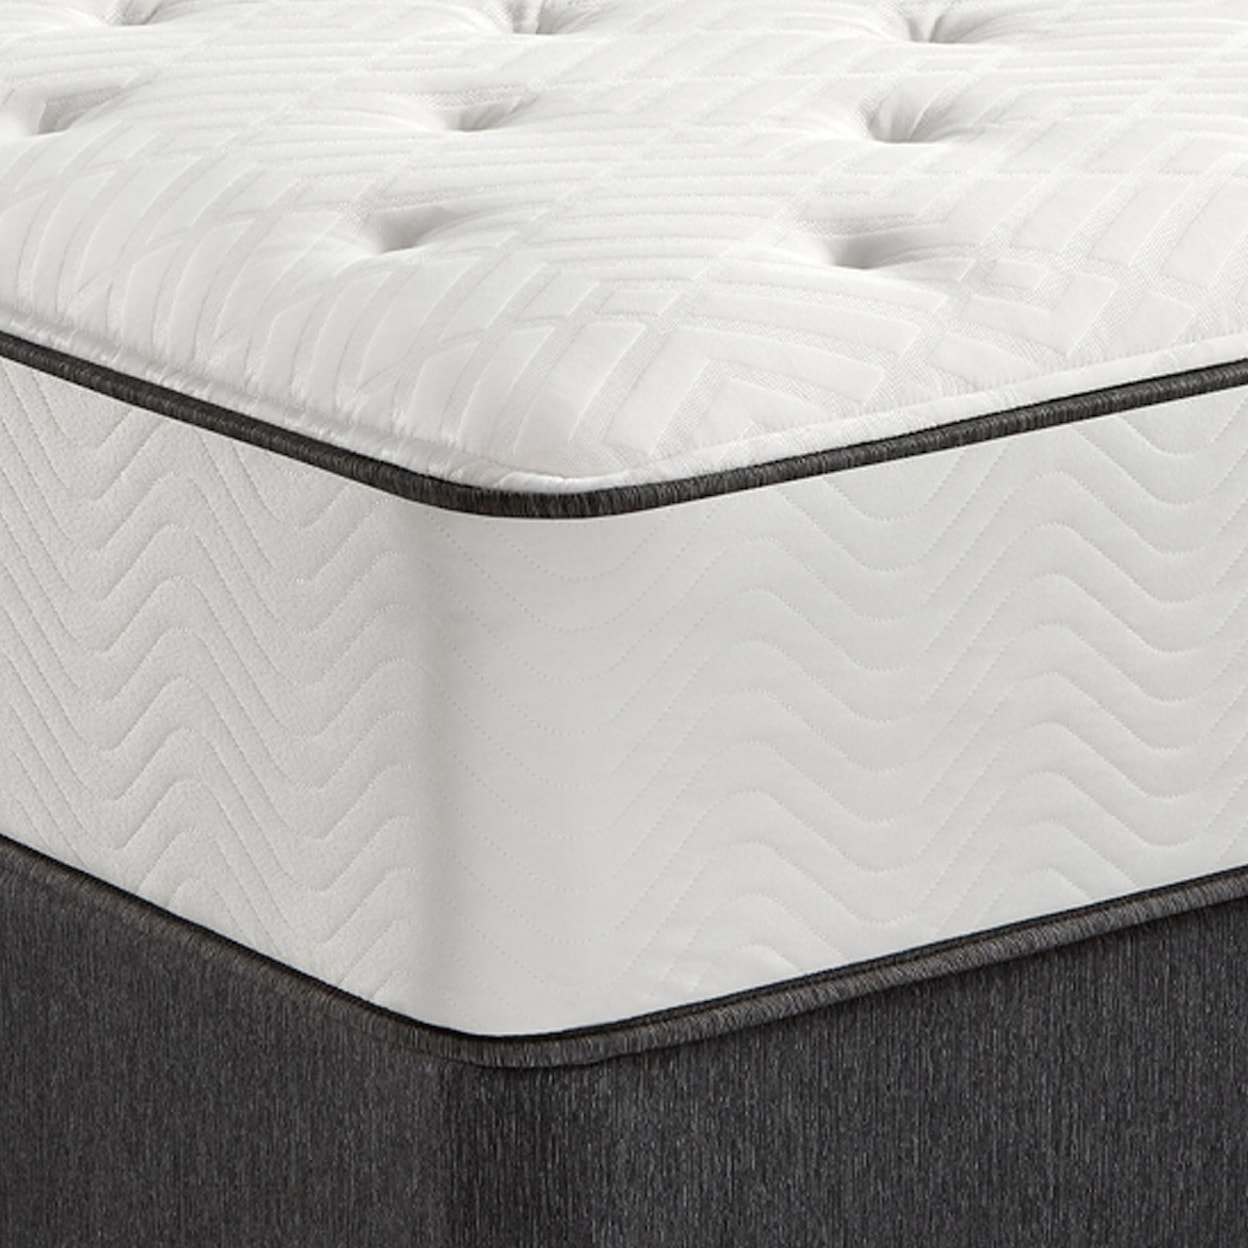 Simmons Holiday 11" Firm Twin Mattress